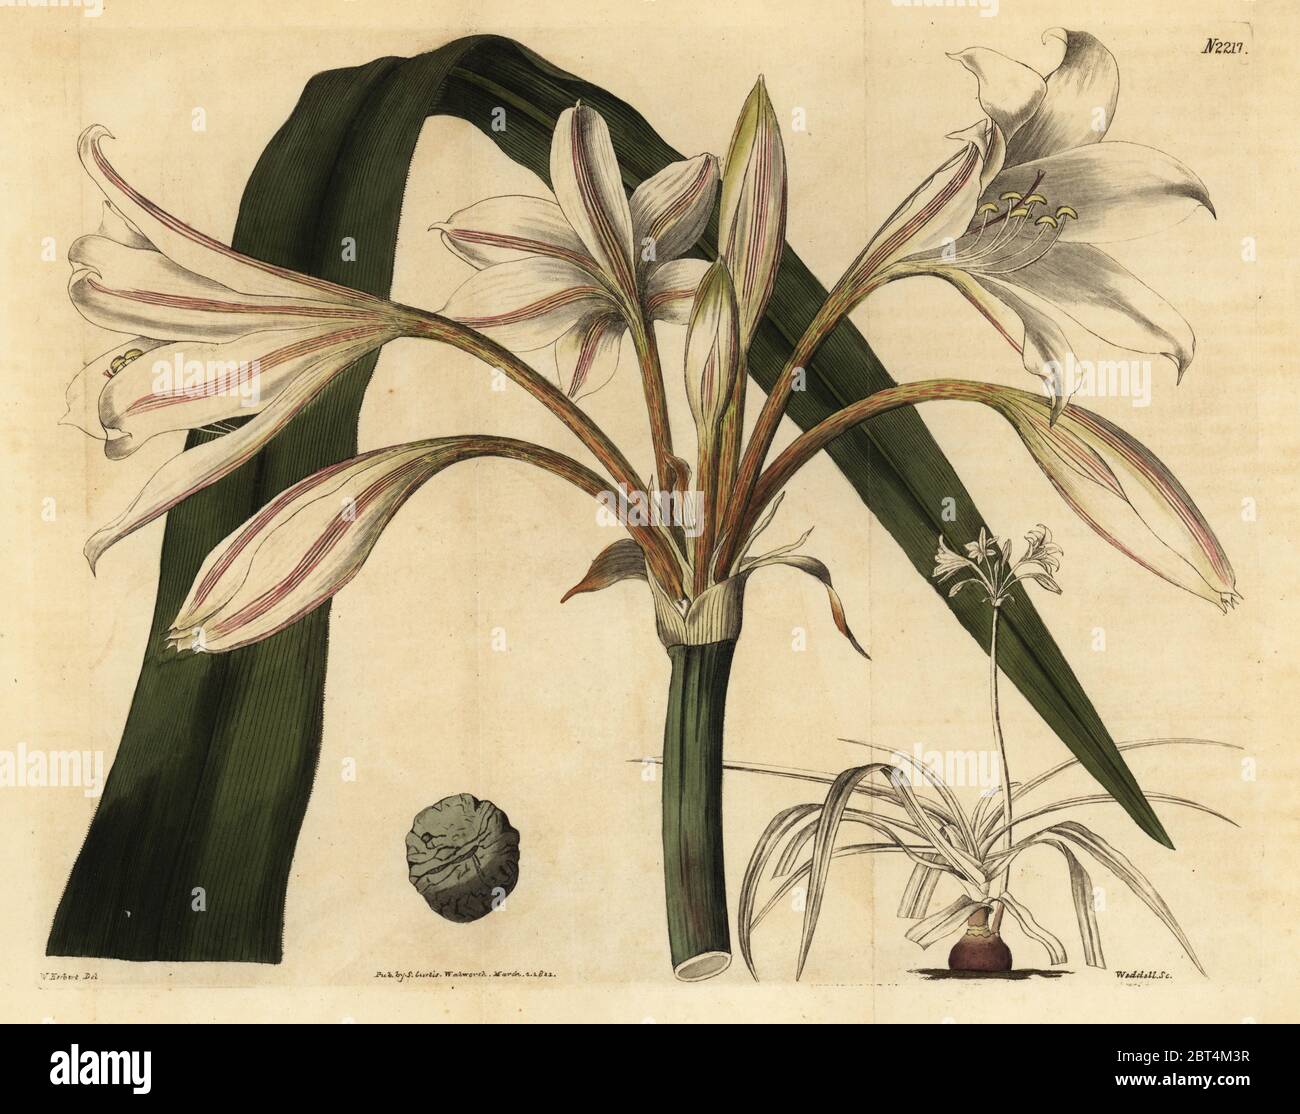 Pink striped trumpet lily, Crinum latifolium (Crinum speciosum). Handcoloured copperplate engraving by Weddell after an illustration by William Herbert from Samuel Curtis' Botanical Magazine, London, 1822. Stock Photo